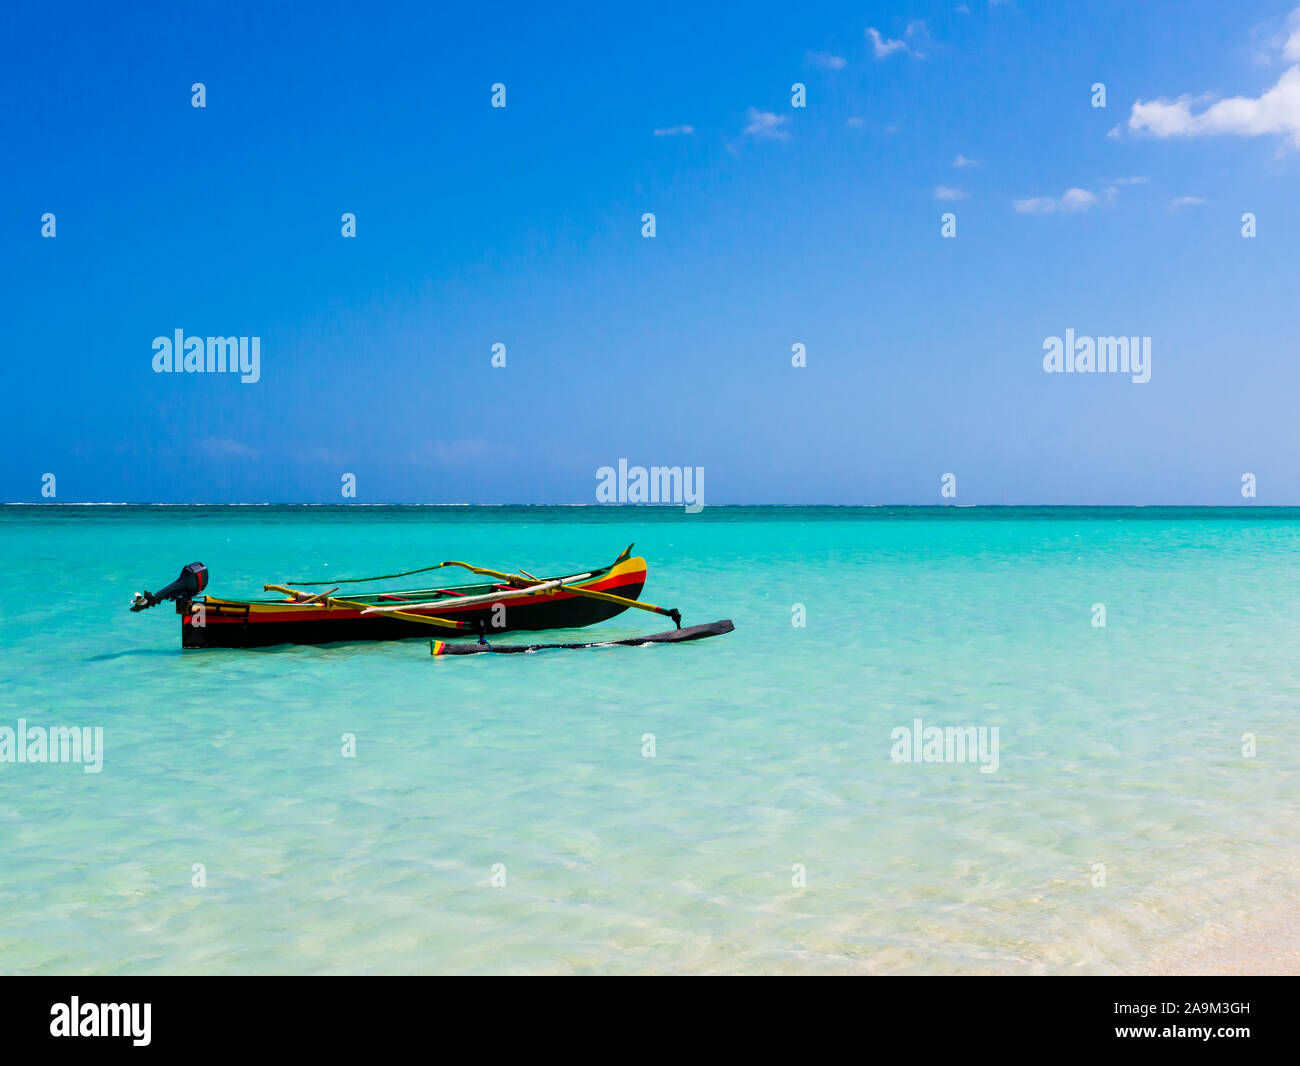 Colorful fishermen pirogue moored on turquoise sea of Nosy Ve island, Indian Ocean, Madagascar Stock Photo